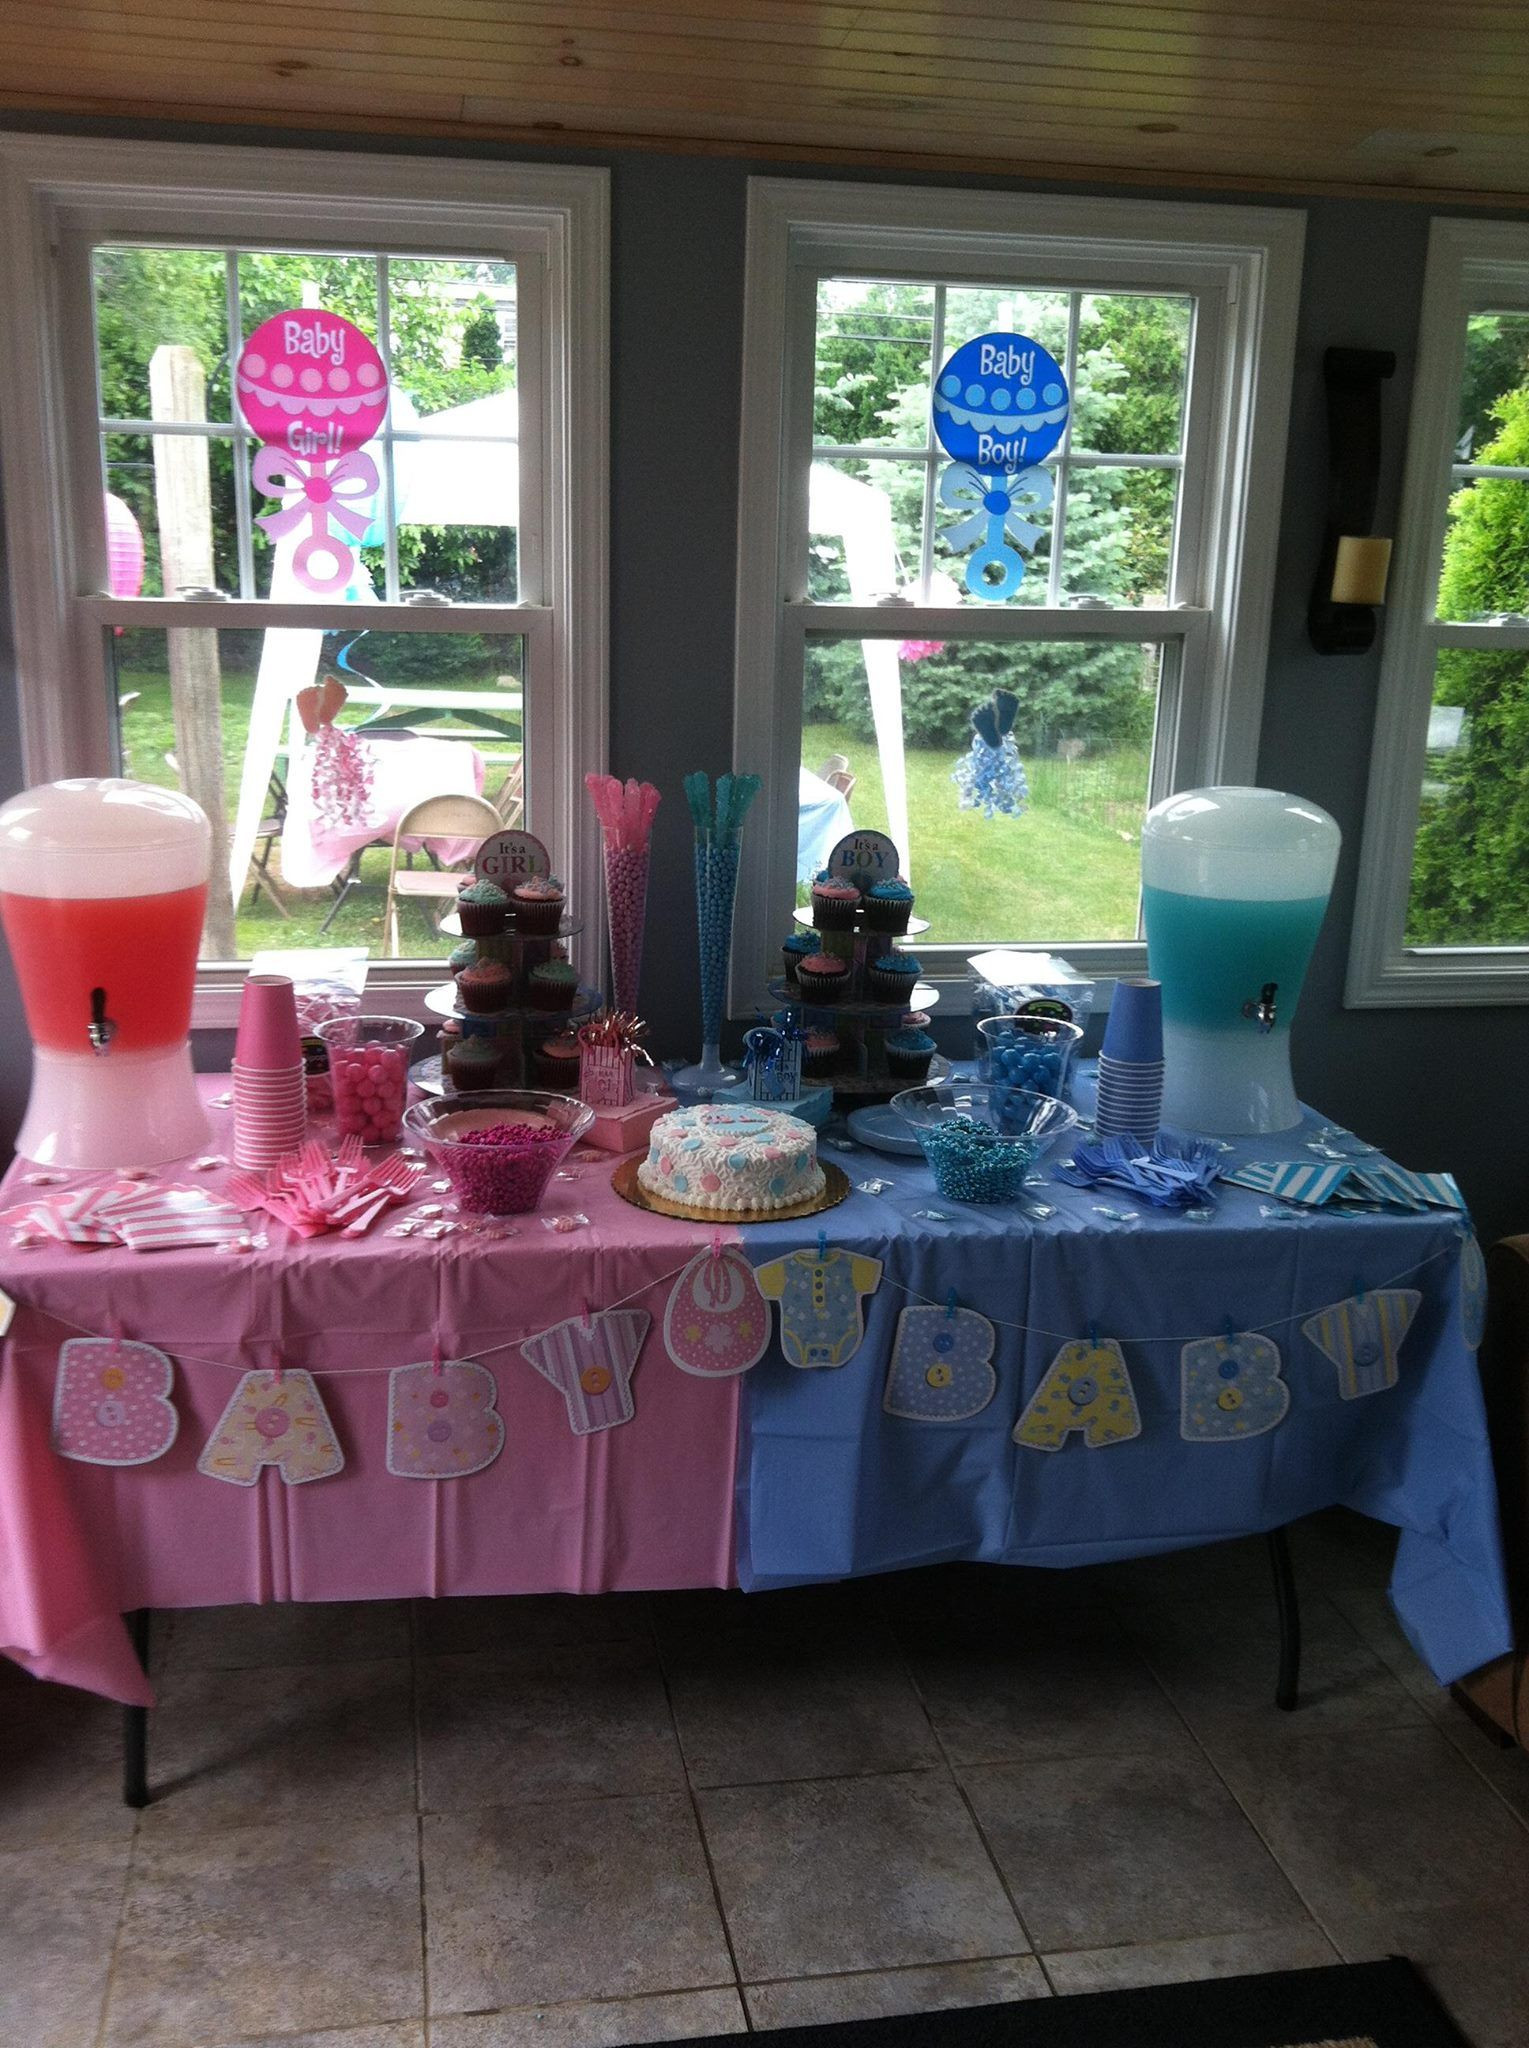 Cute Ideas For Baby Gender Reveal Party
 gender reveal party